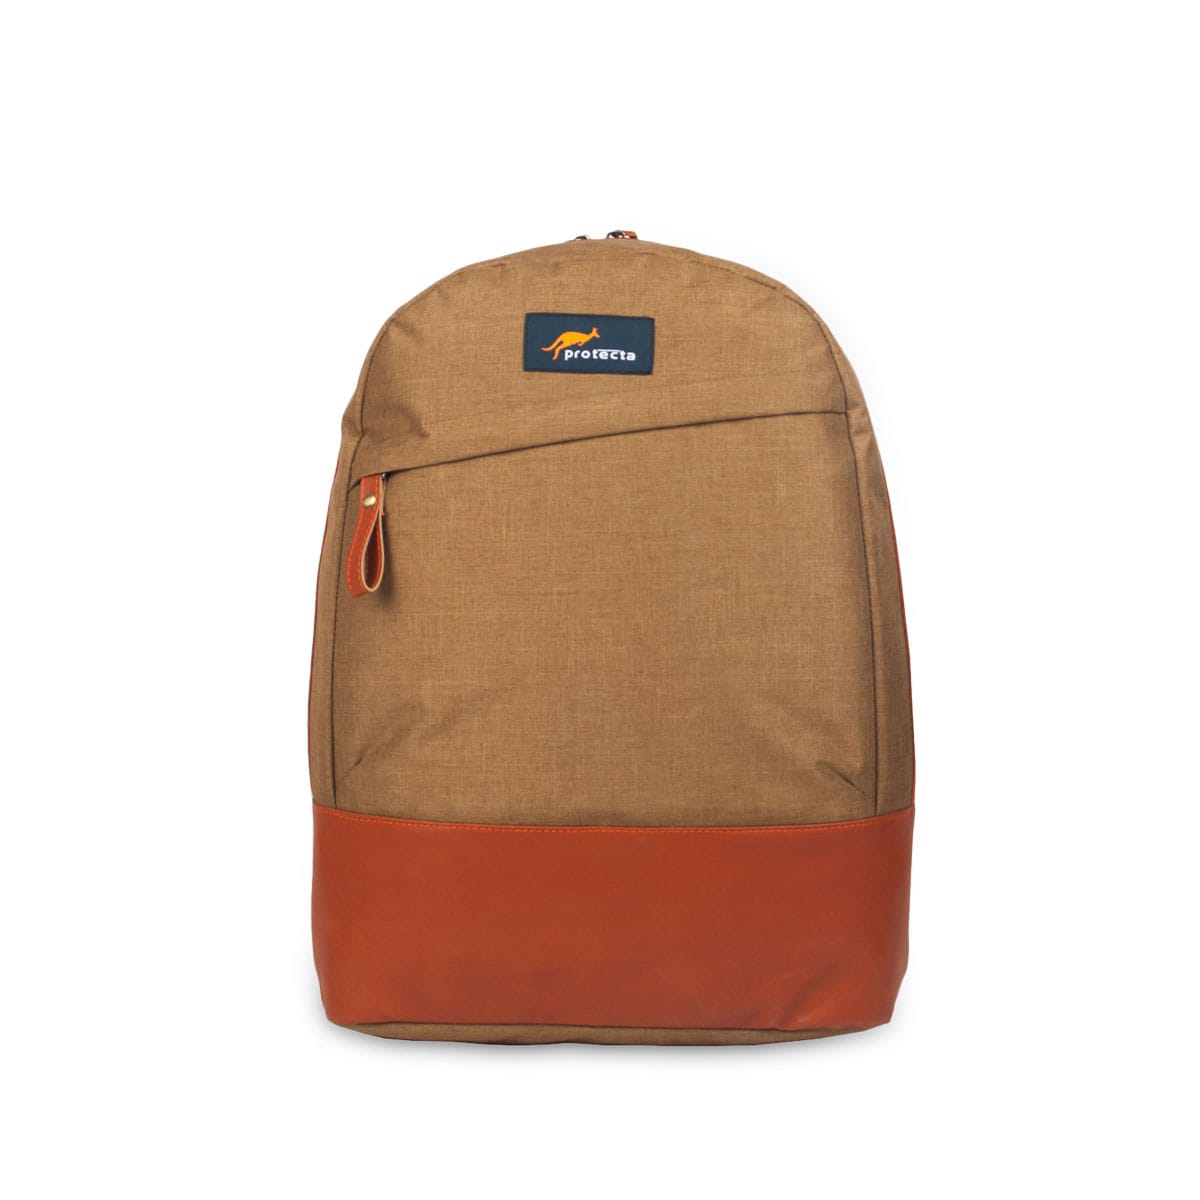 Tan-Harvest-Beige, Protecta Private Access Casual Backpack-Main